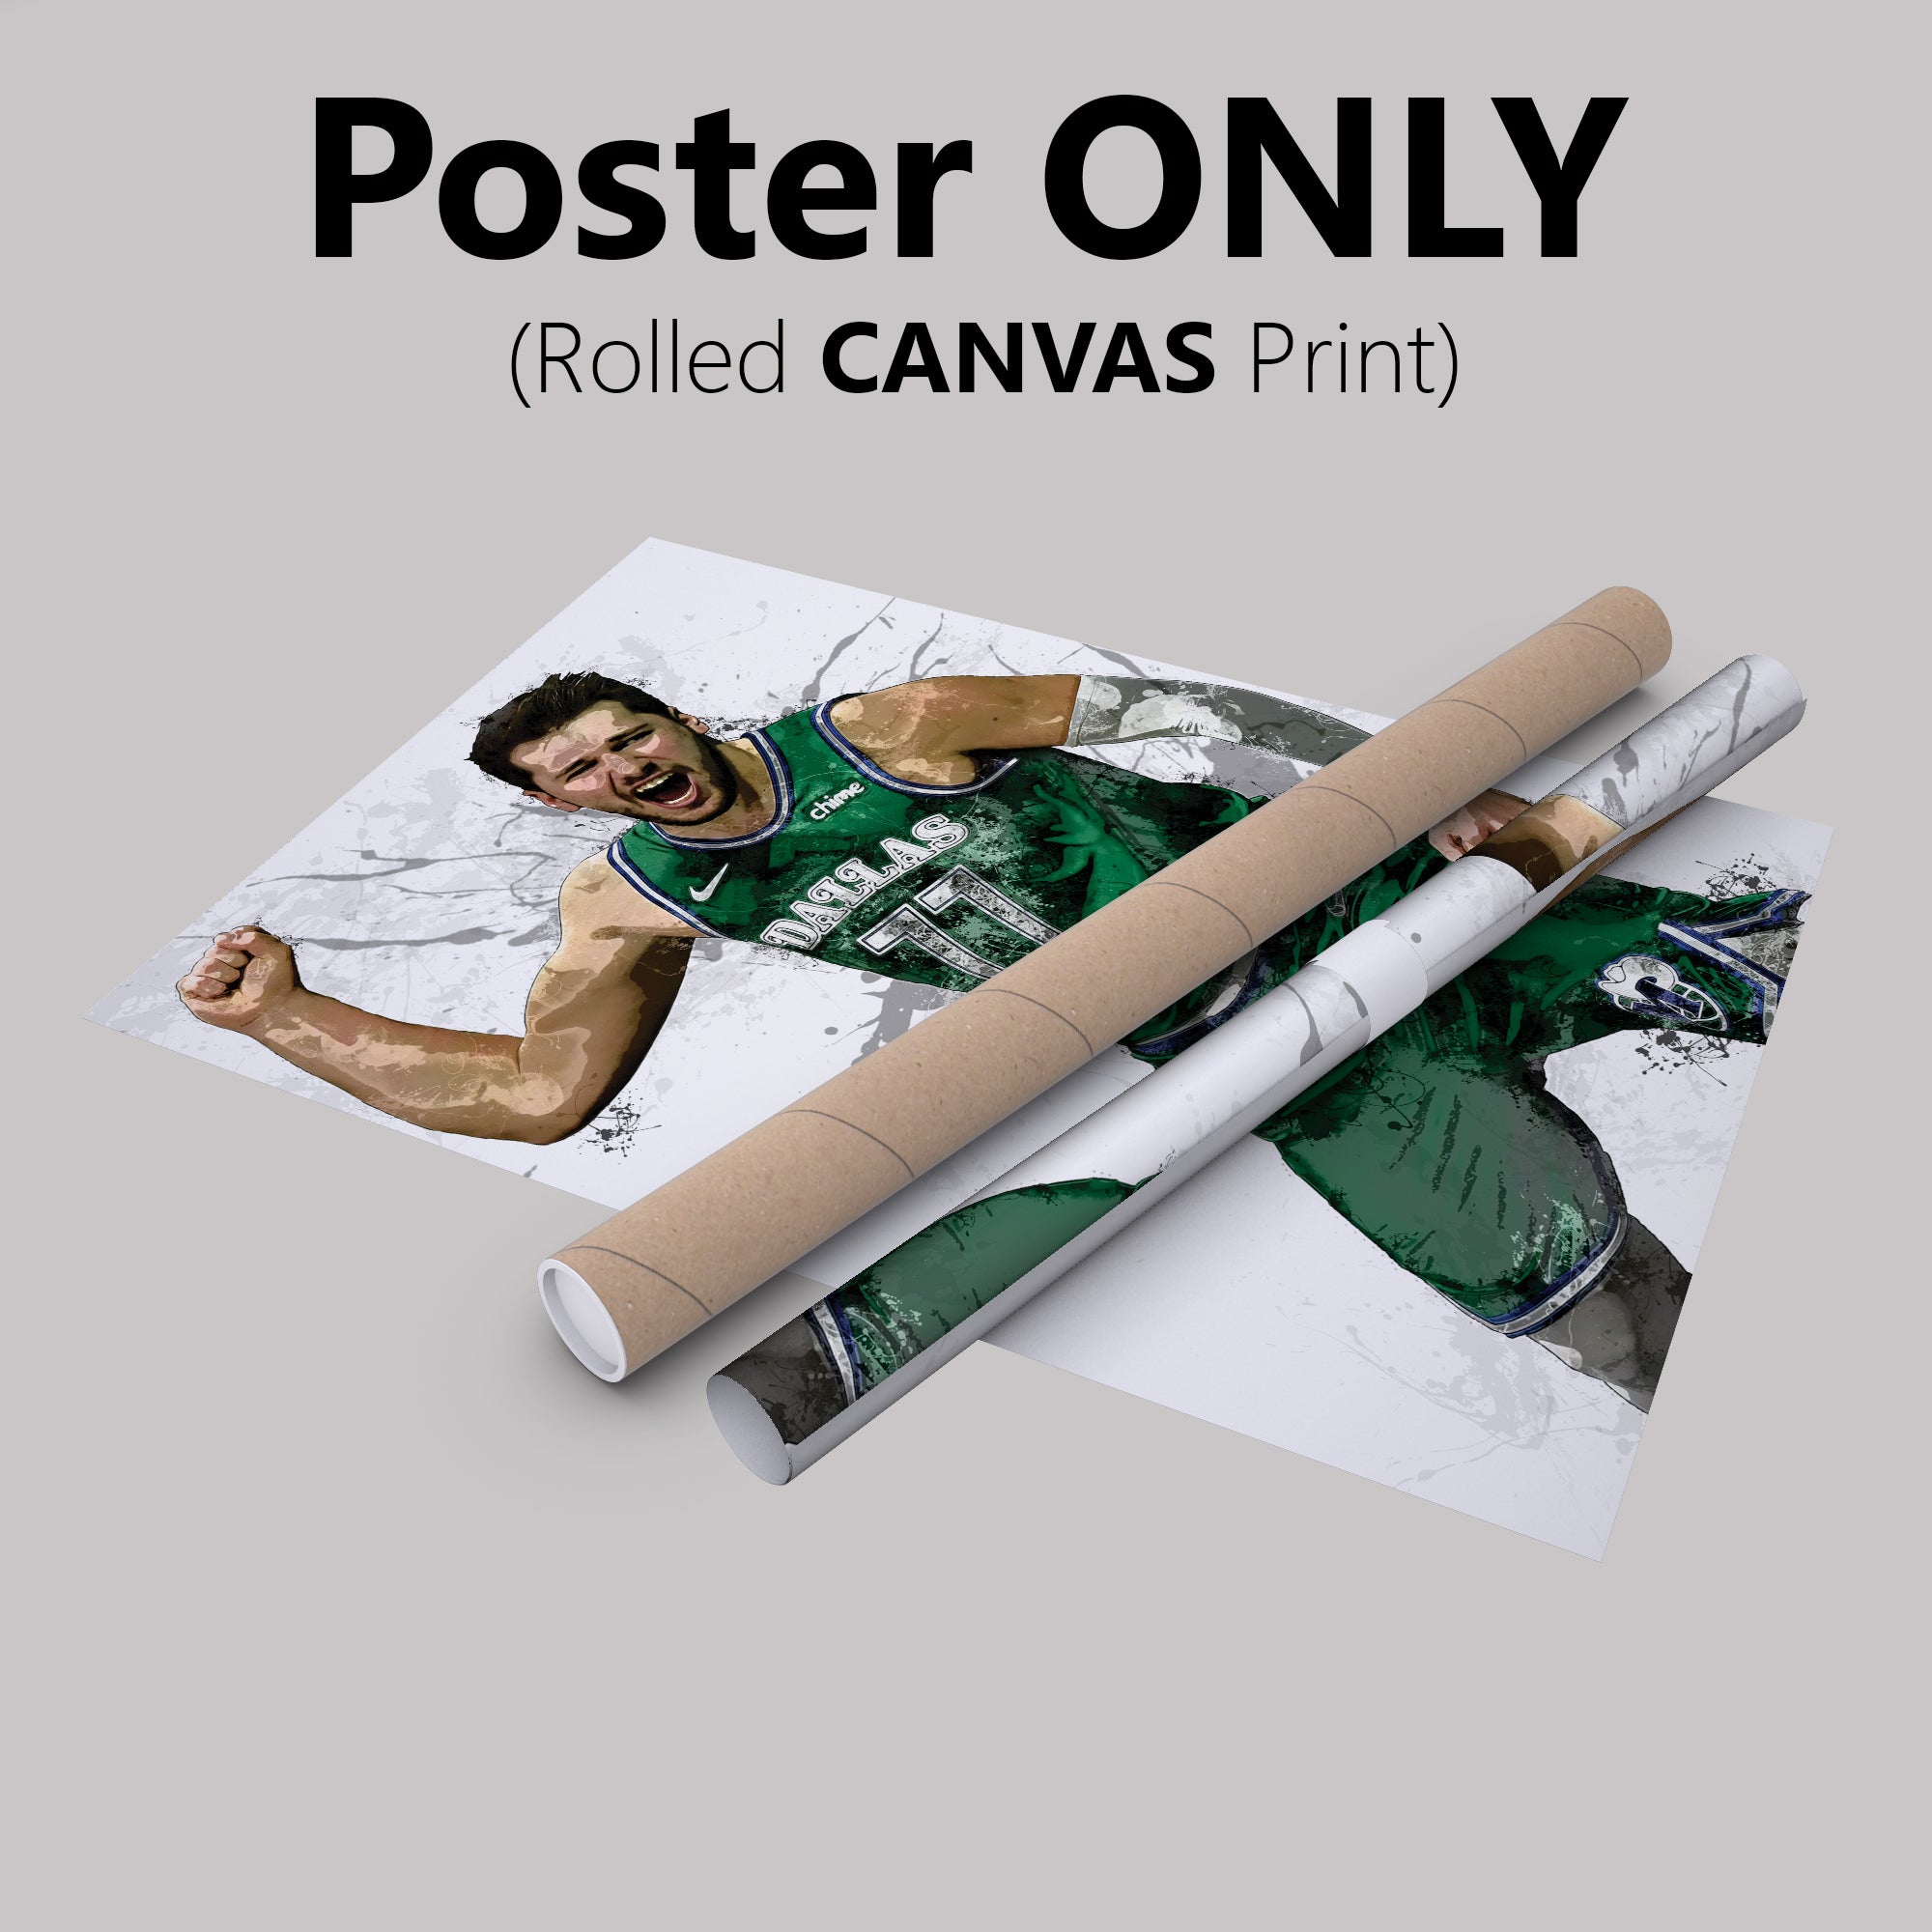 Luka Doncic Art Board Print for Sale by athleteart20